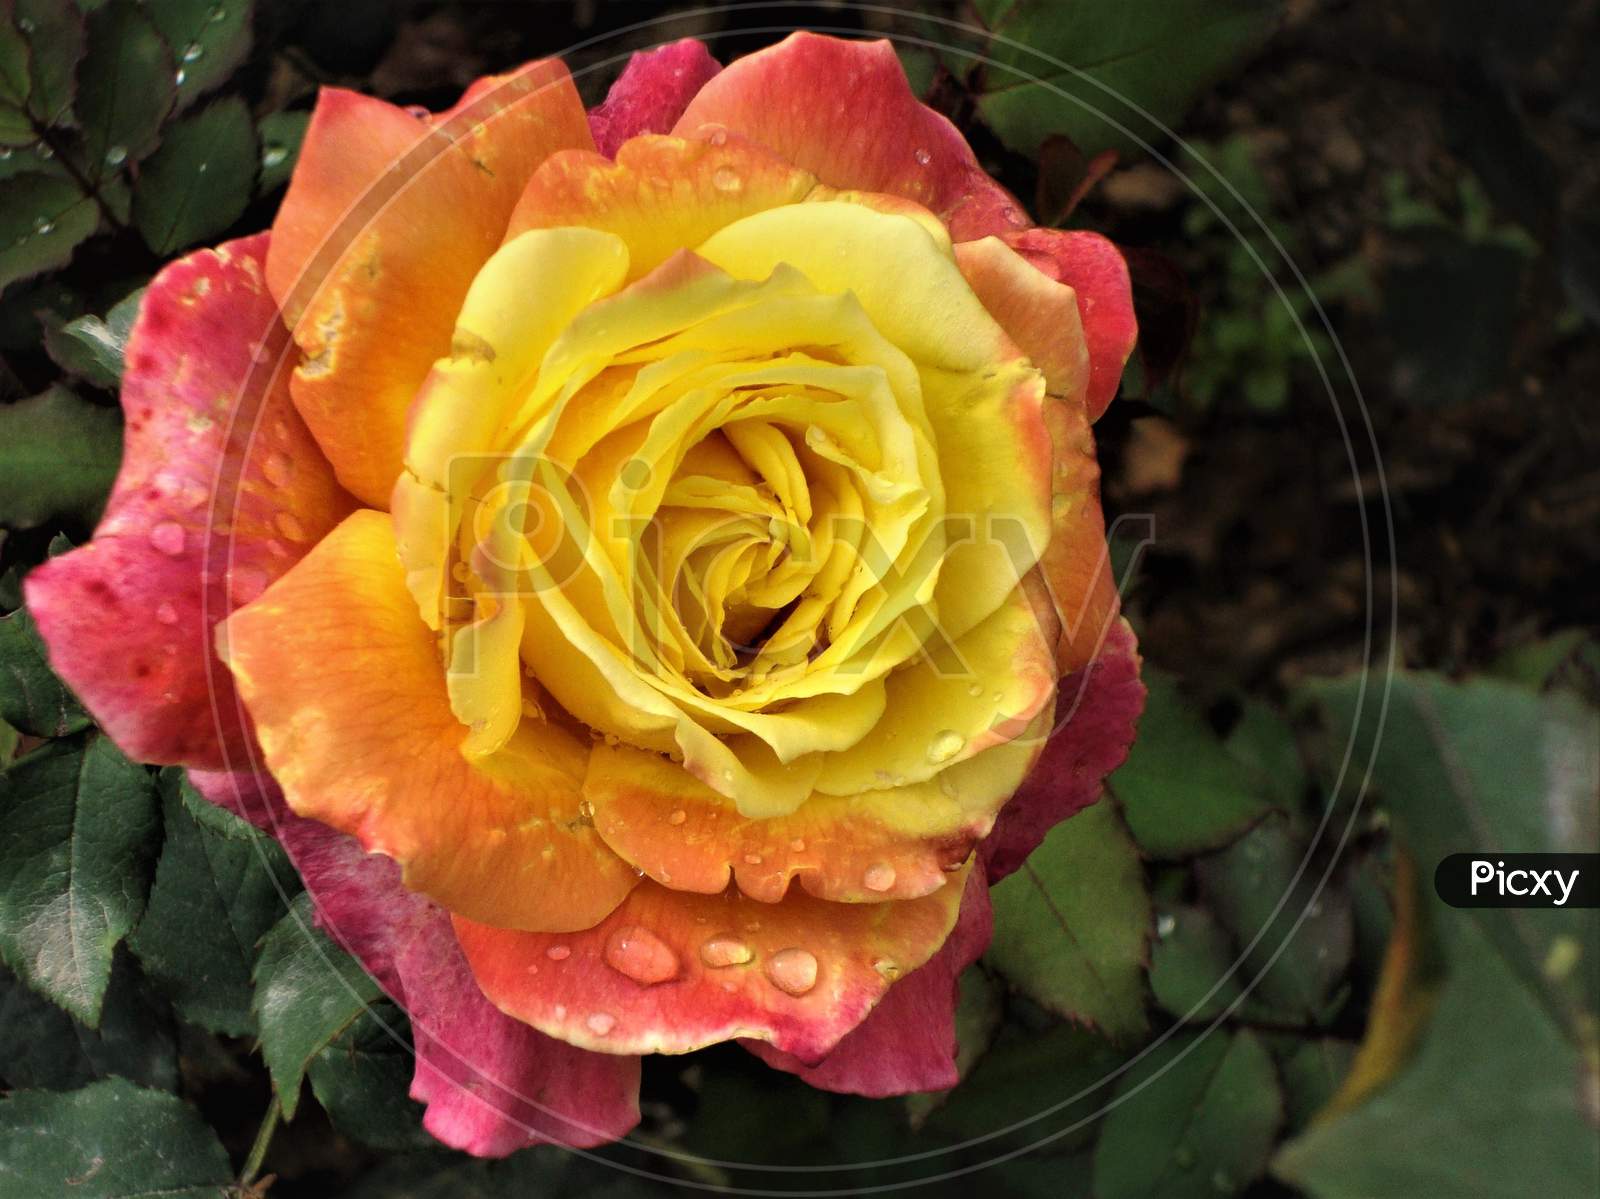 Lovely pinkish yellow rose flower with curly petals holding rain drops on green base, India